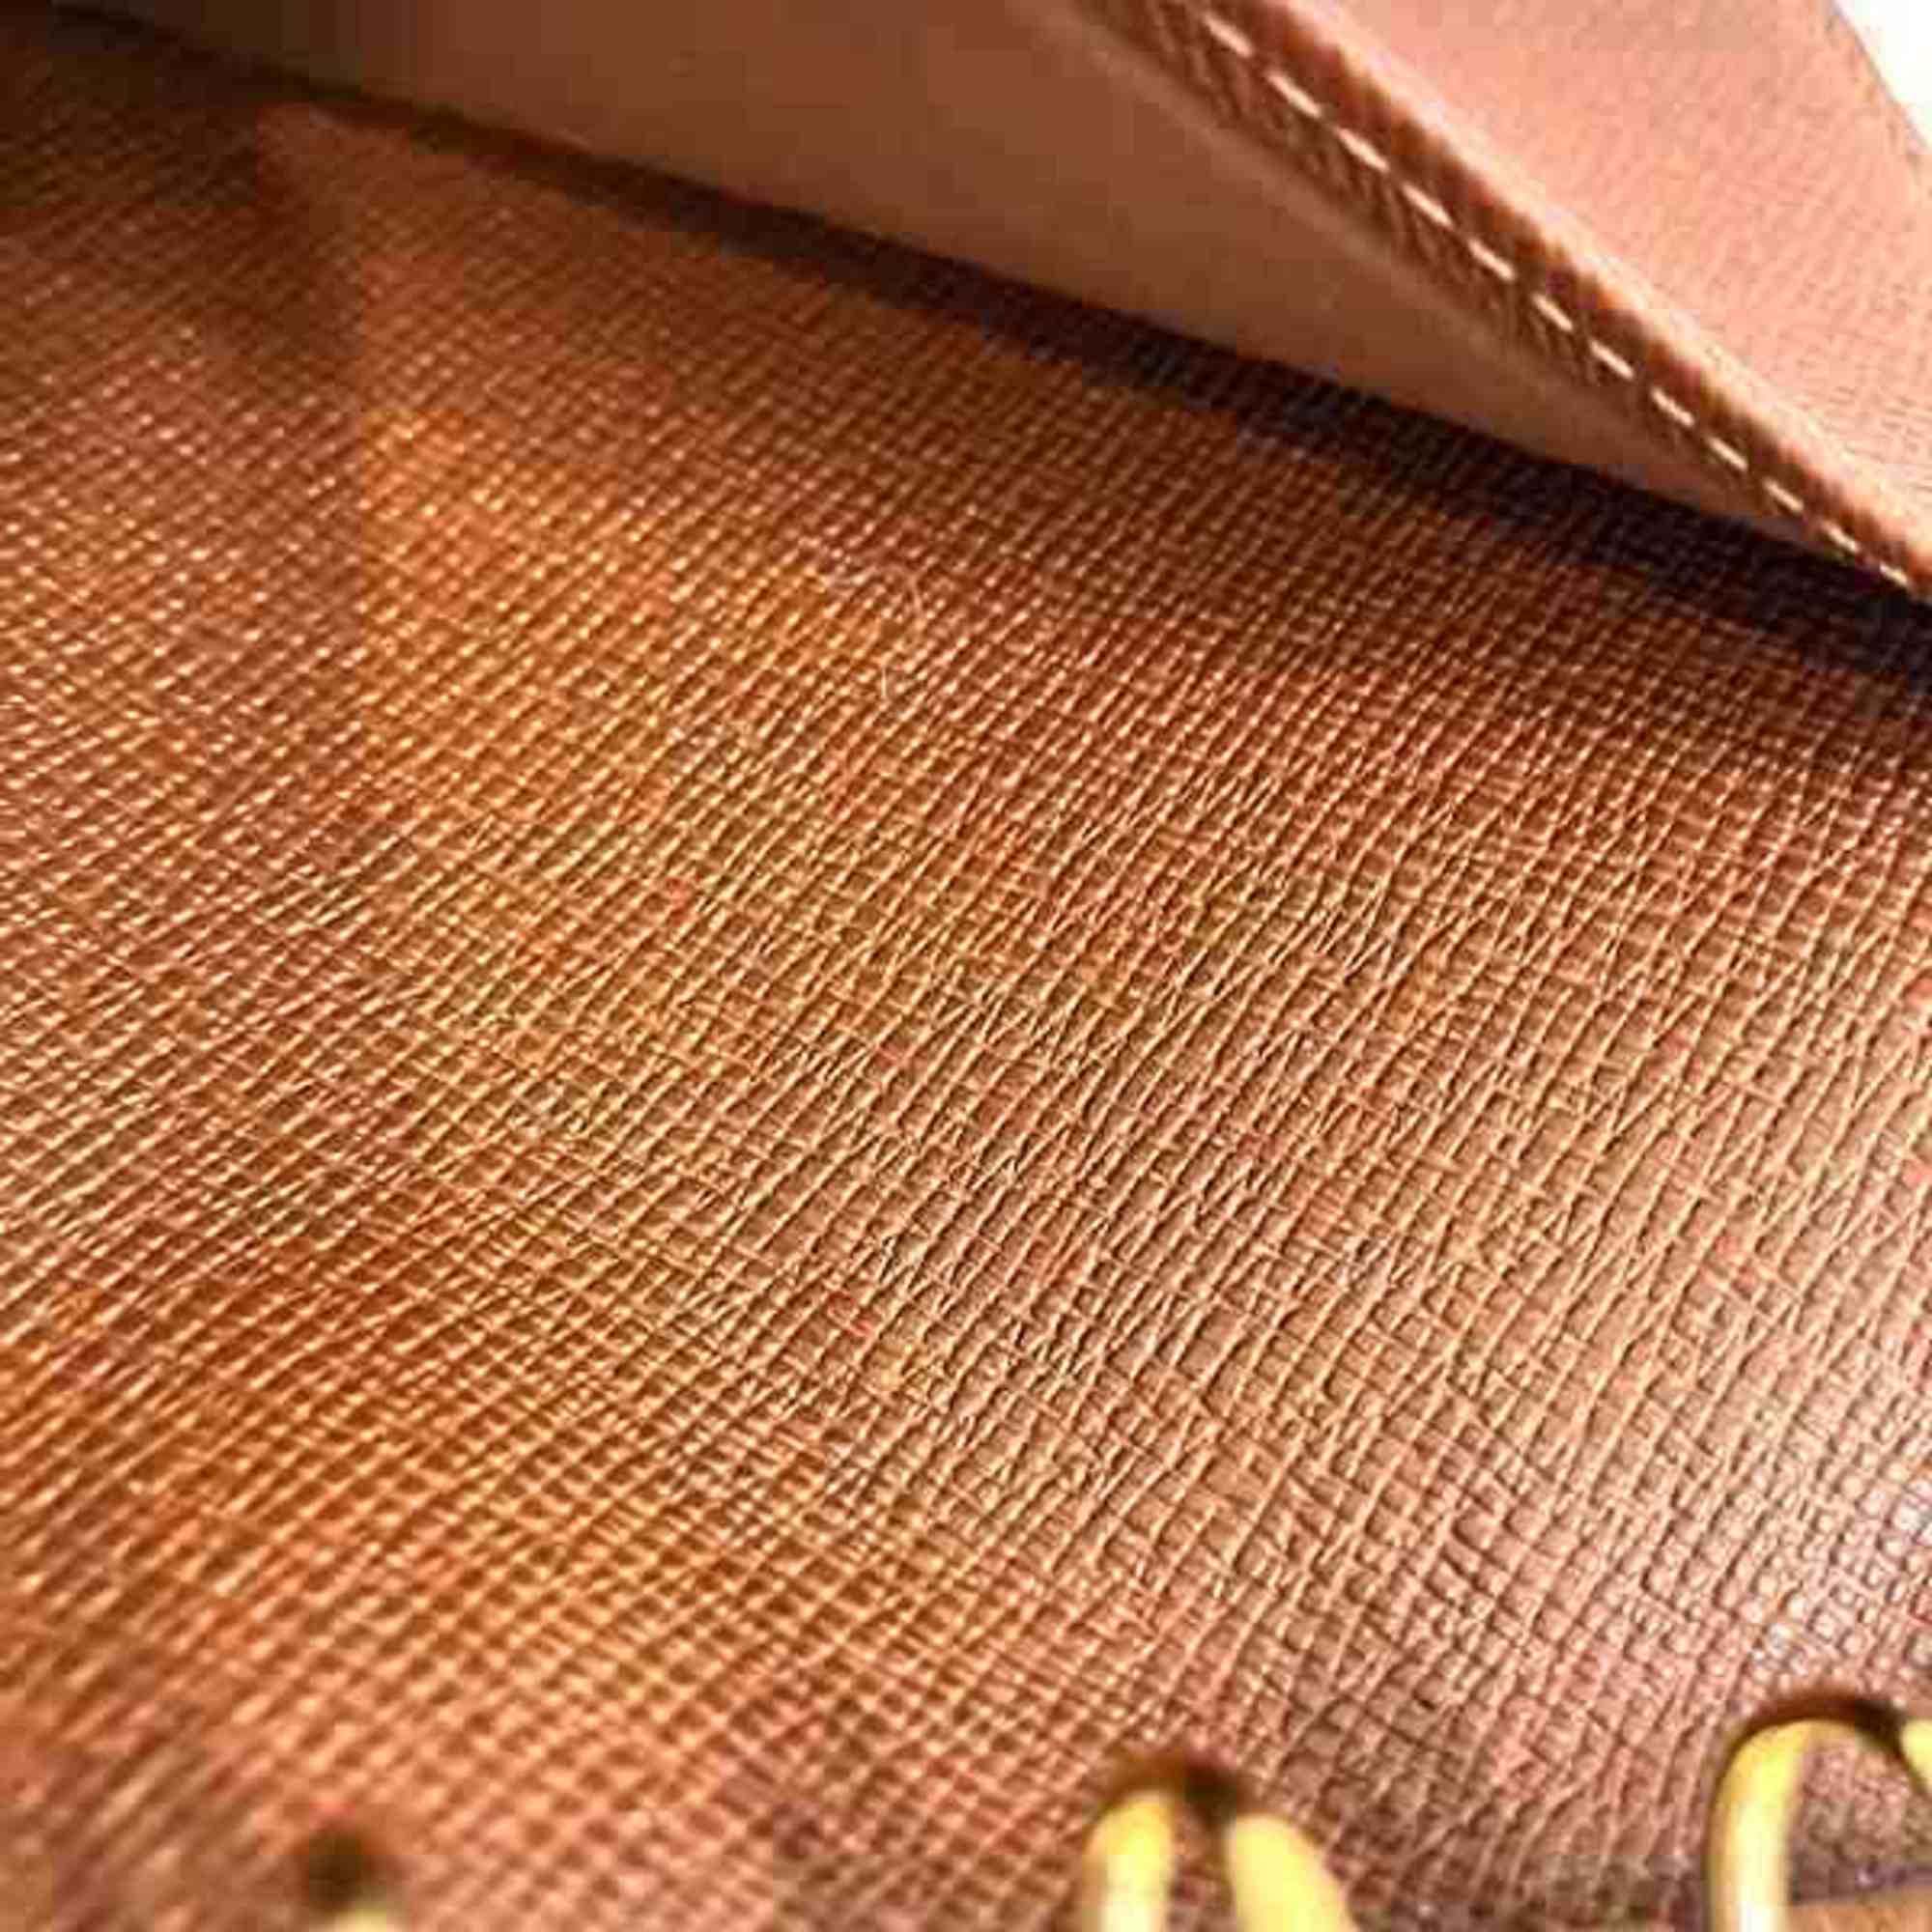 Louis Vuitton Monogram Agenda PM R20005 Small items, notebook covers, for men and women